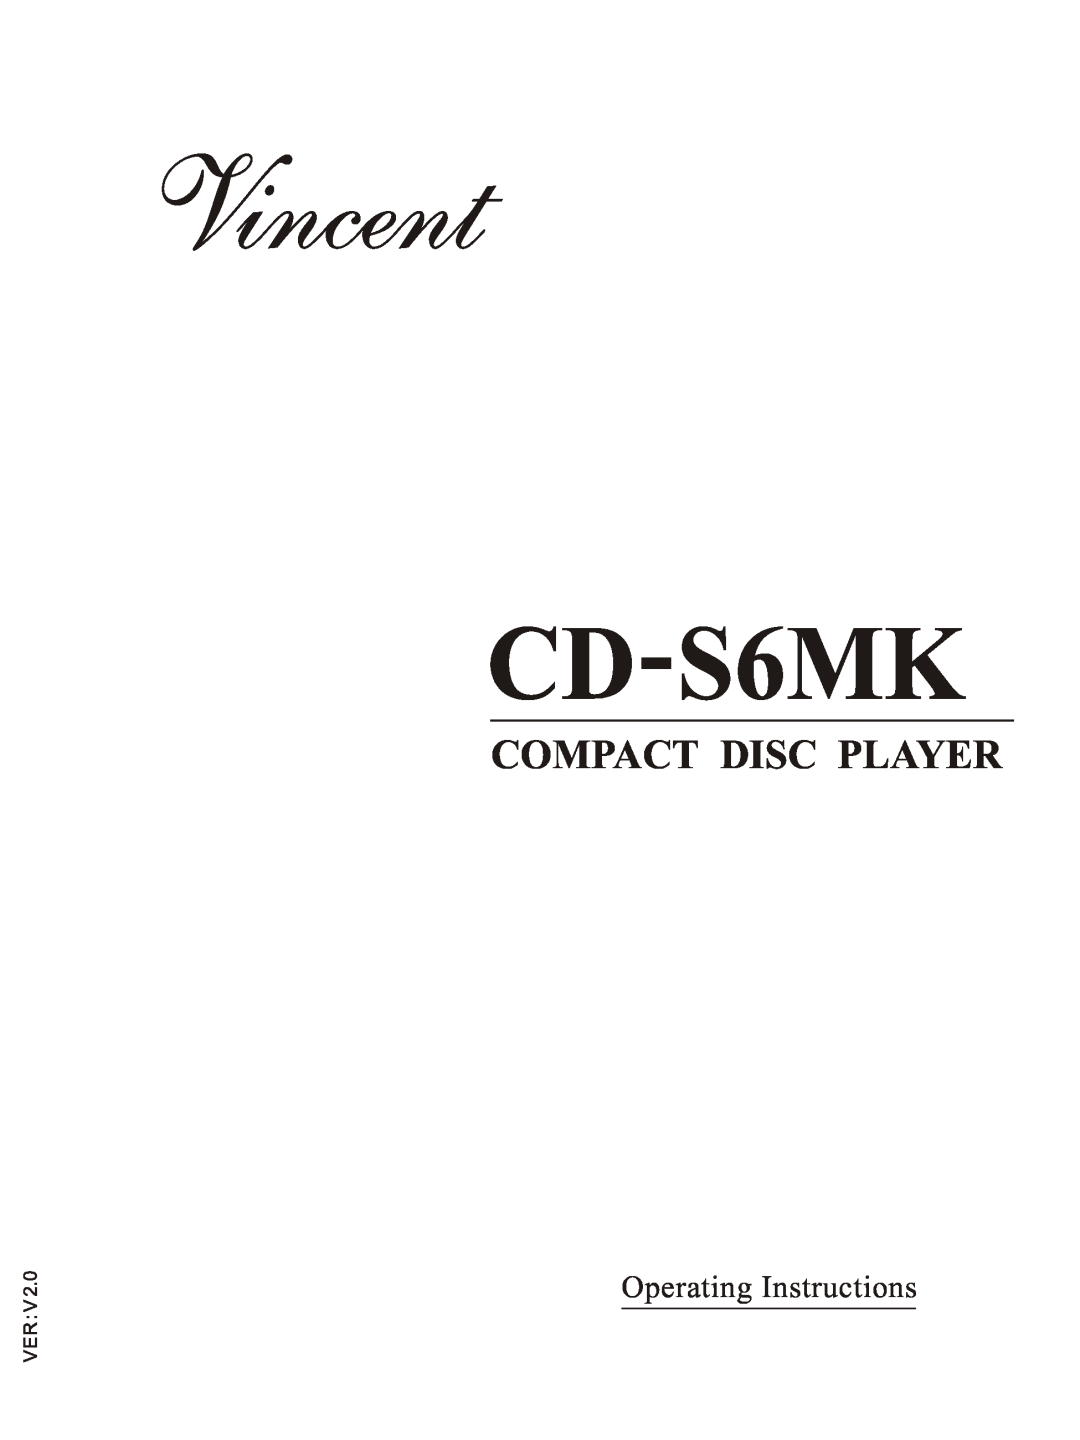 Vincent Audio CD-S6MK operating instructions Compact Disc Player, Operating Instructions 